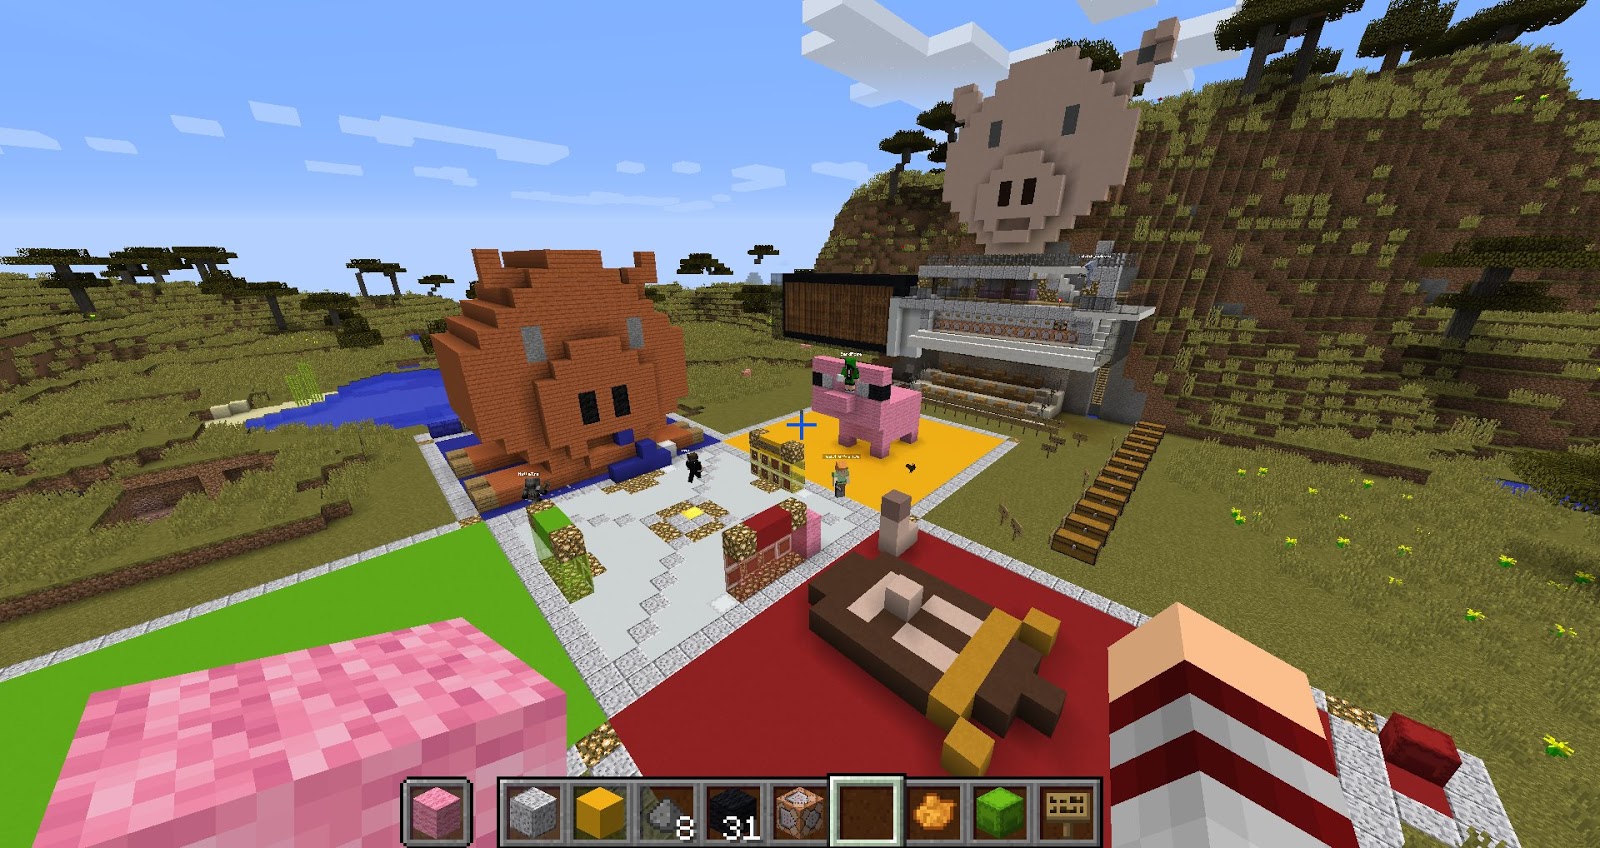 EVO Minecraft MOOC 2018 building challenge: The year of the pig.